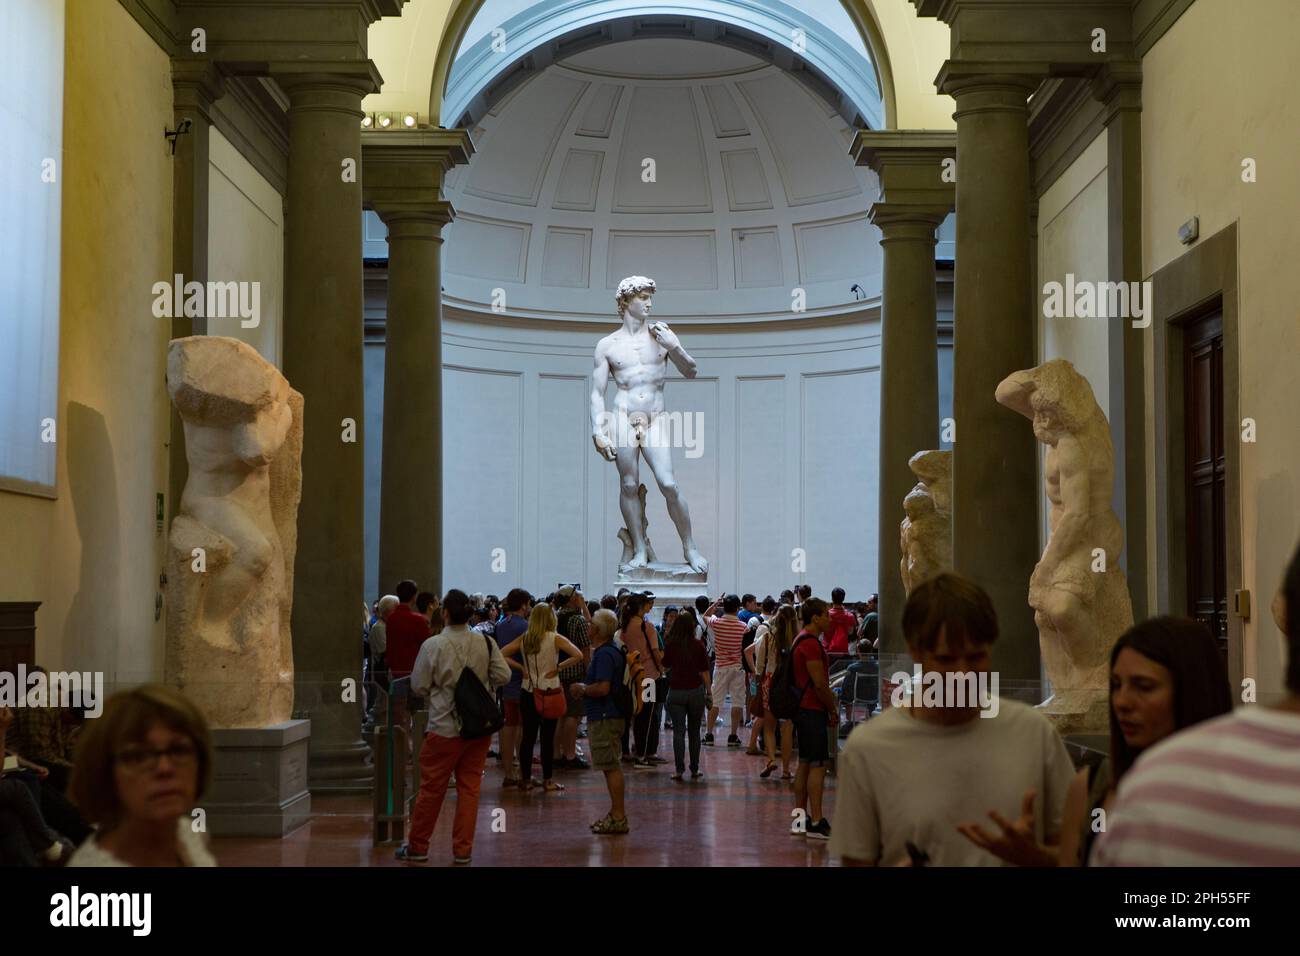 Florence, Italy - Jun 17, 2014: Tourist visit the Accademia Gallery, home to the masterpiece of Renaissance sculpture David, created in marble between Stock Photo